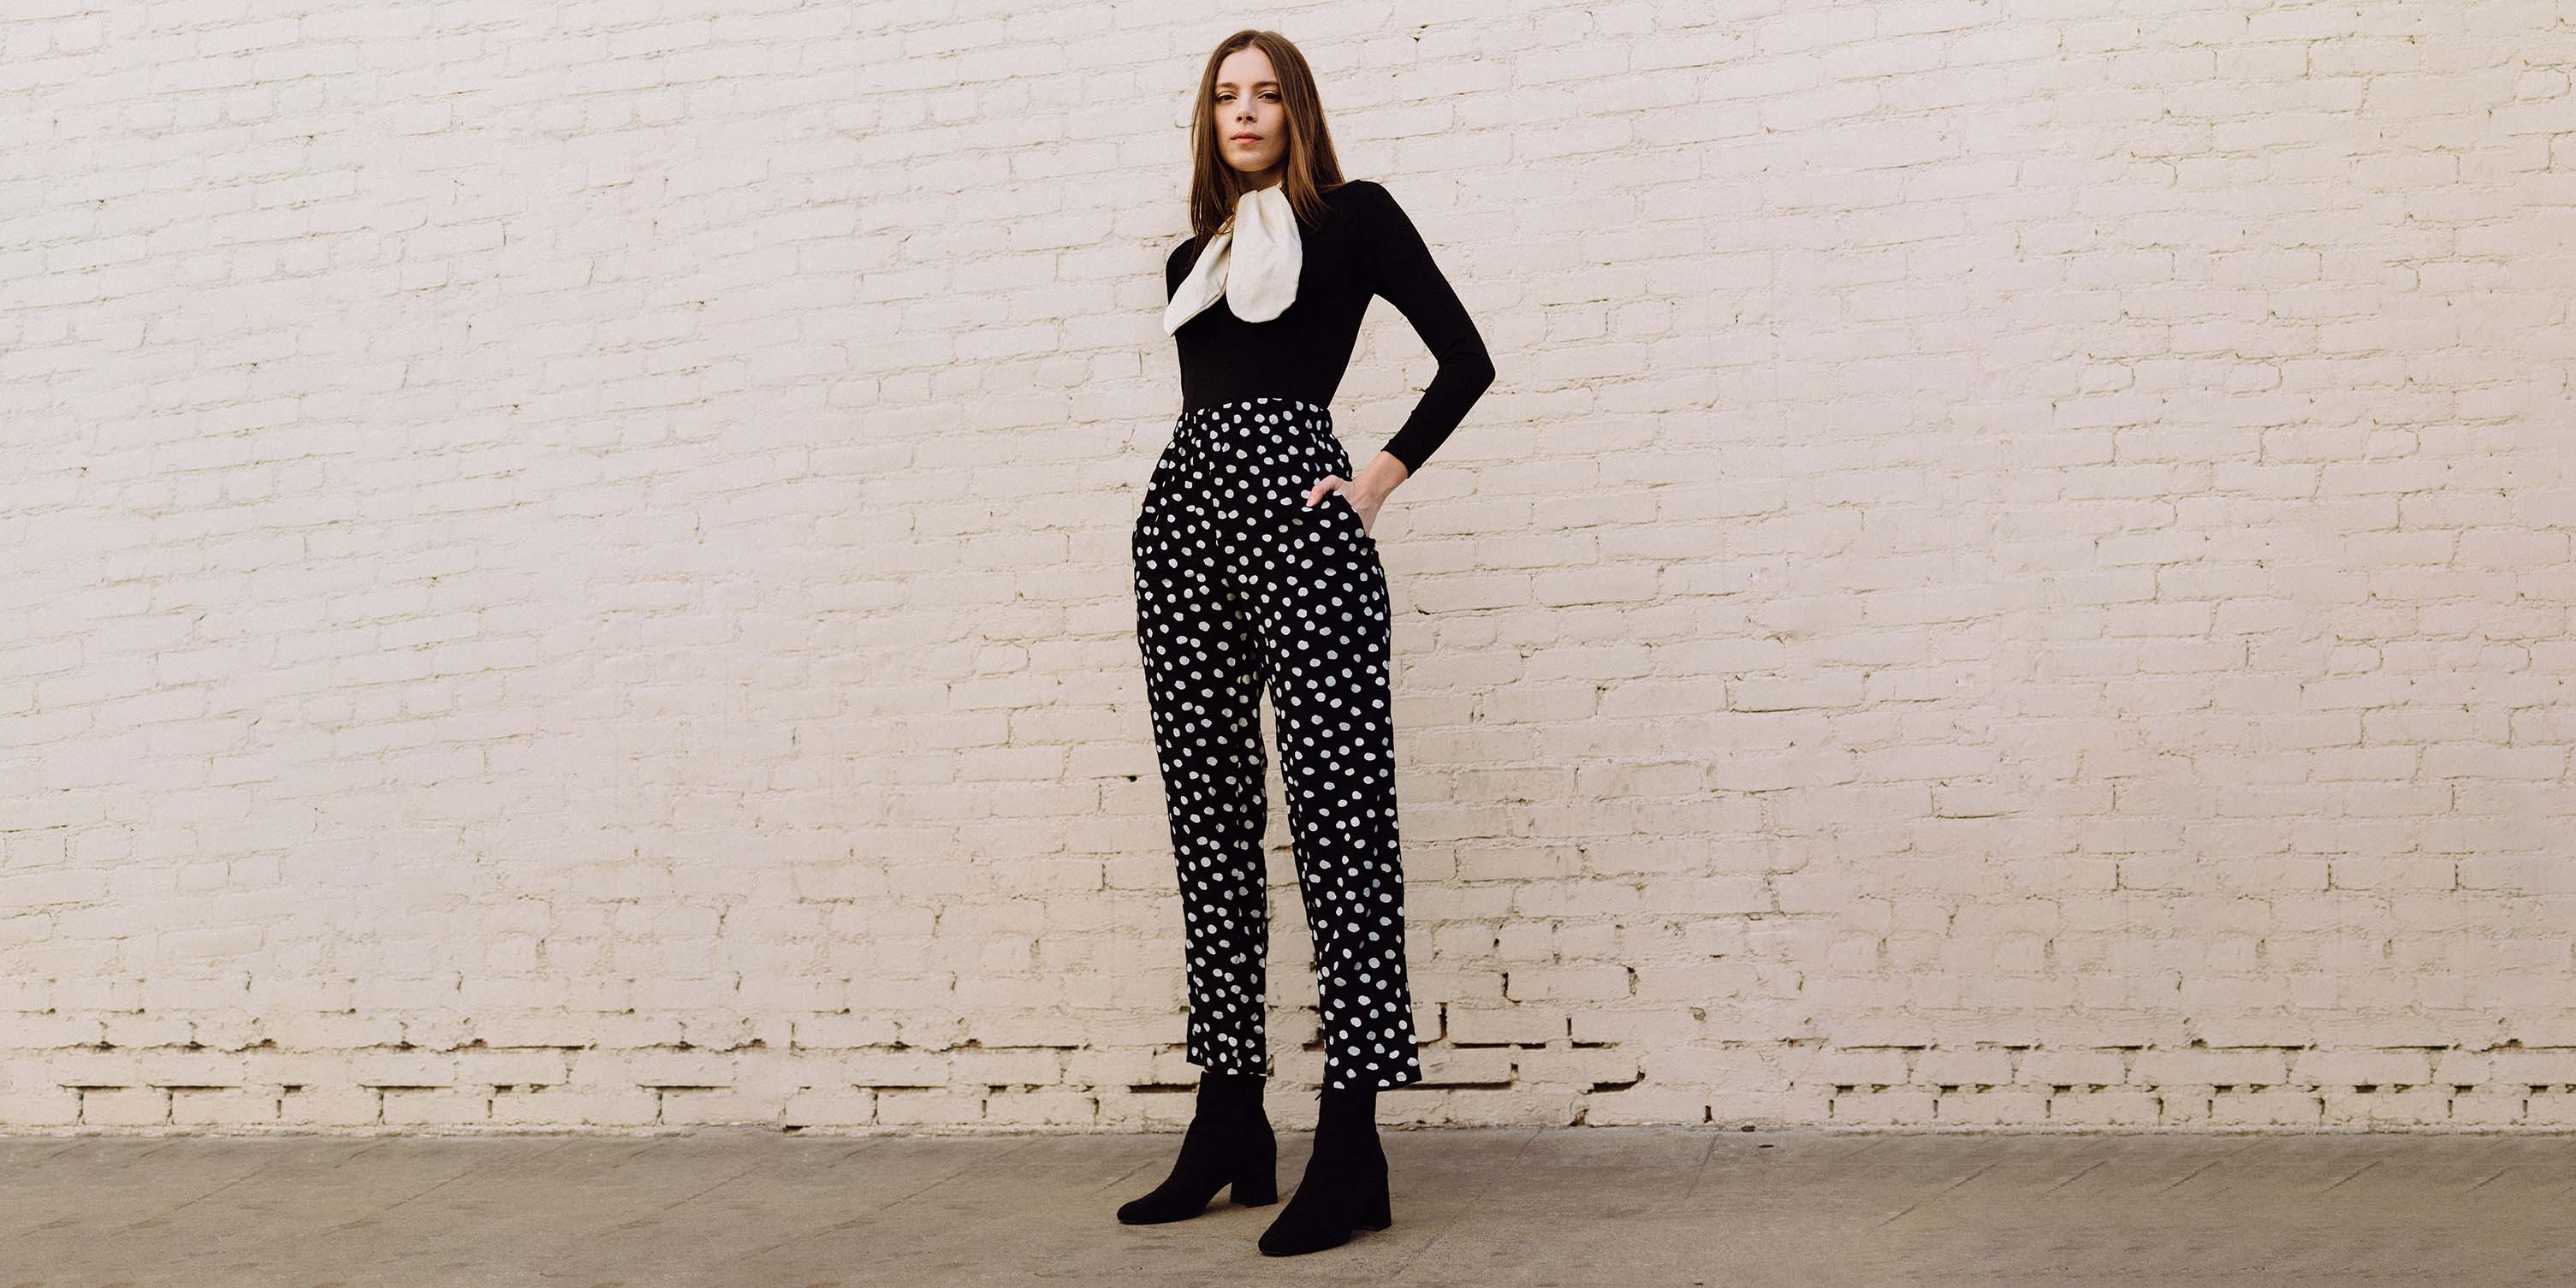 Stylish editorial photograph of a model wearing vintage polka dot pants & a 60s black & white ascot blouse from Flying Apple Vintage.